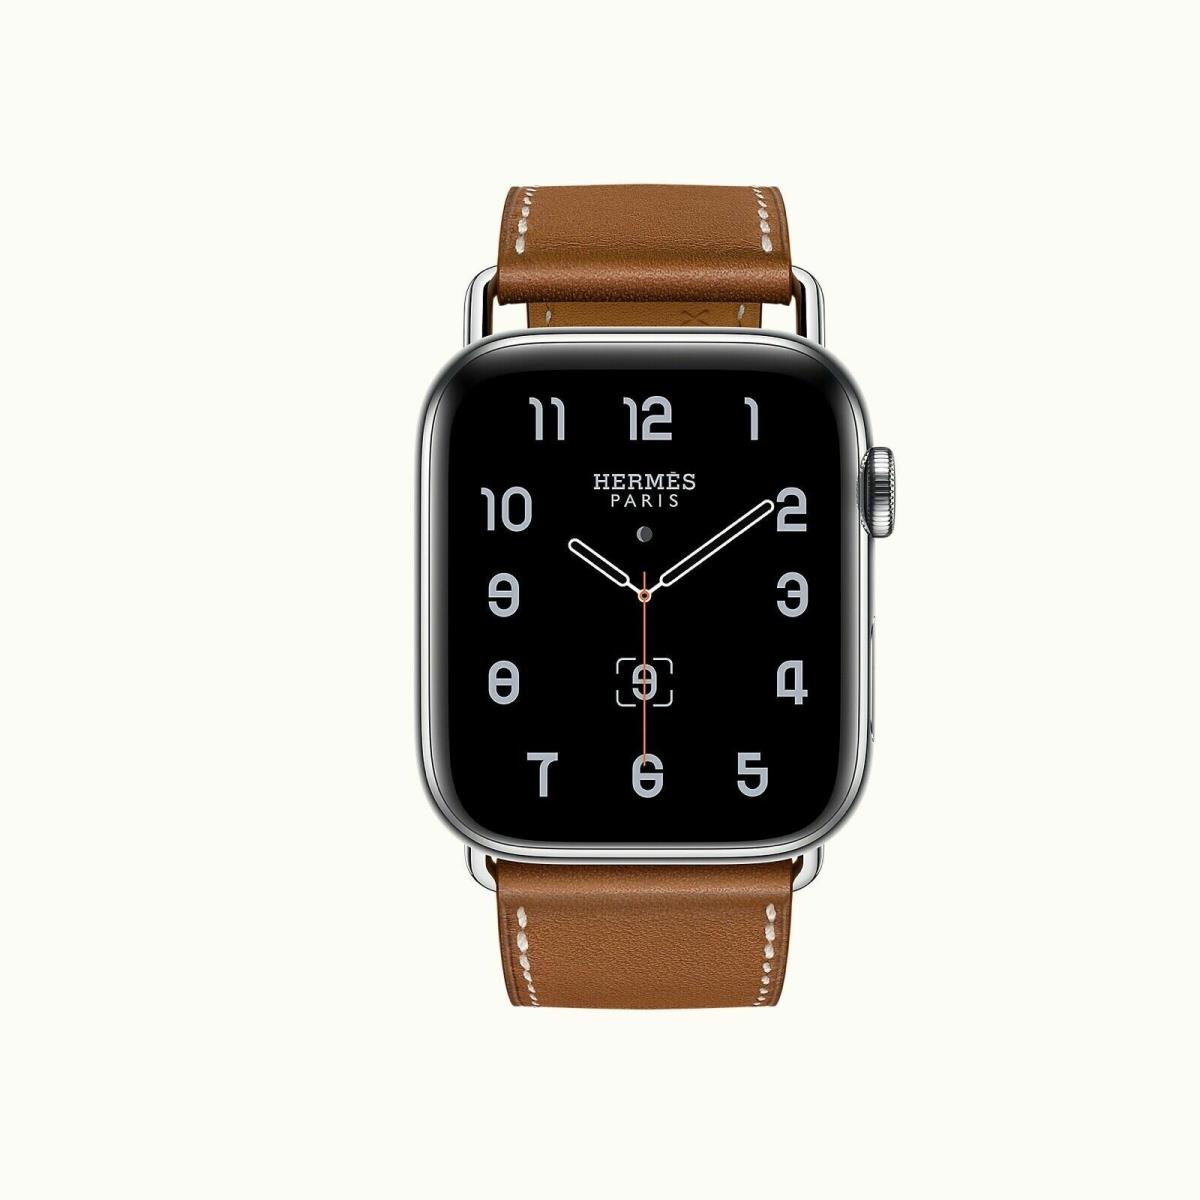 Hermes Band Apple Watch Single Tour 44 mm Attelage Fauve Band